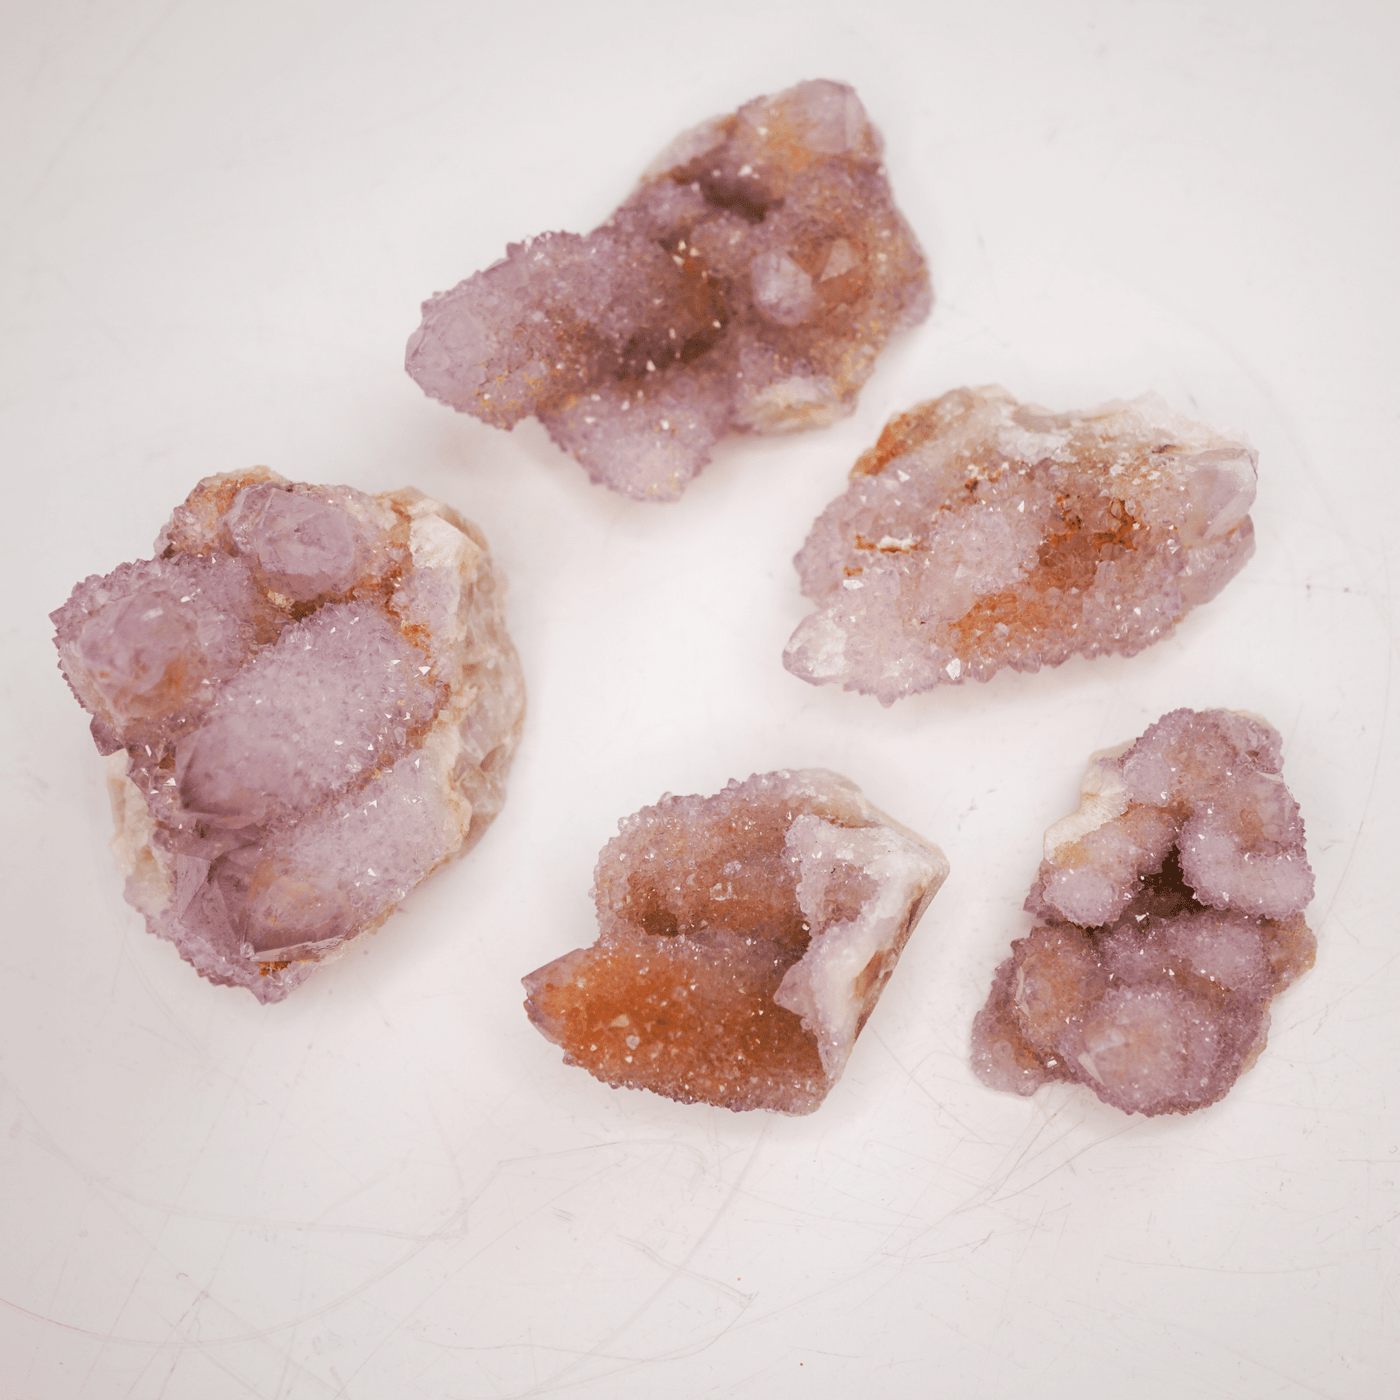 Assortment of 5 cactus spirit quartz displaying the variety of sizes, colors, patterns and shapes by Energy Muse